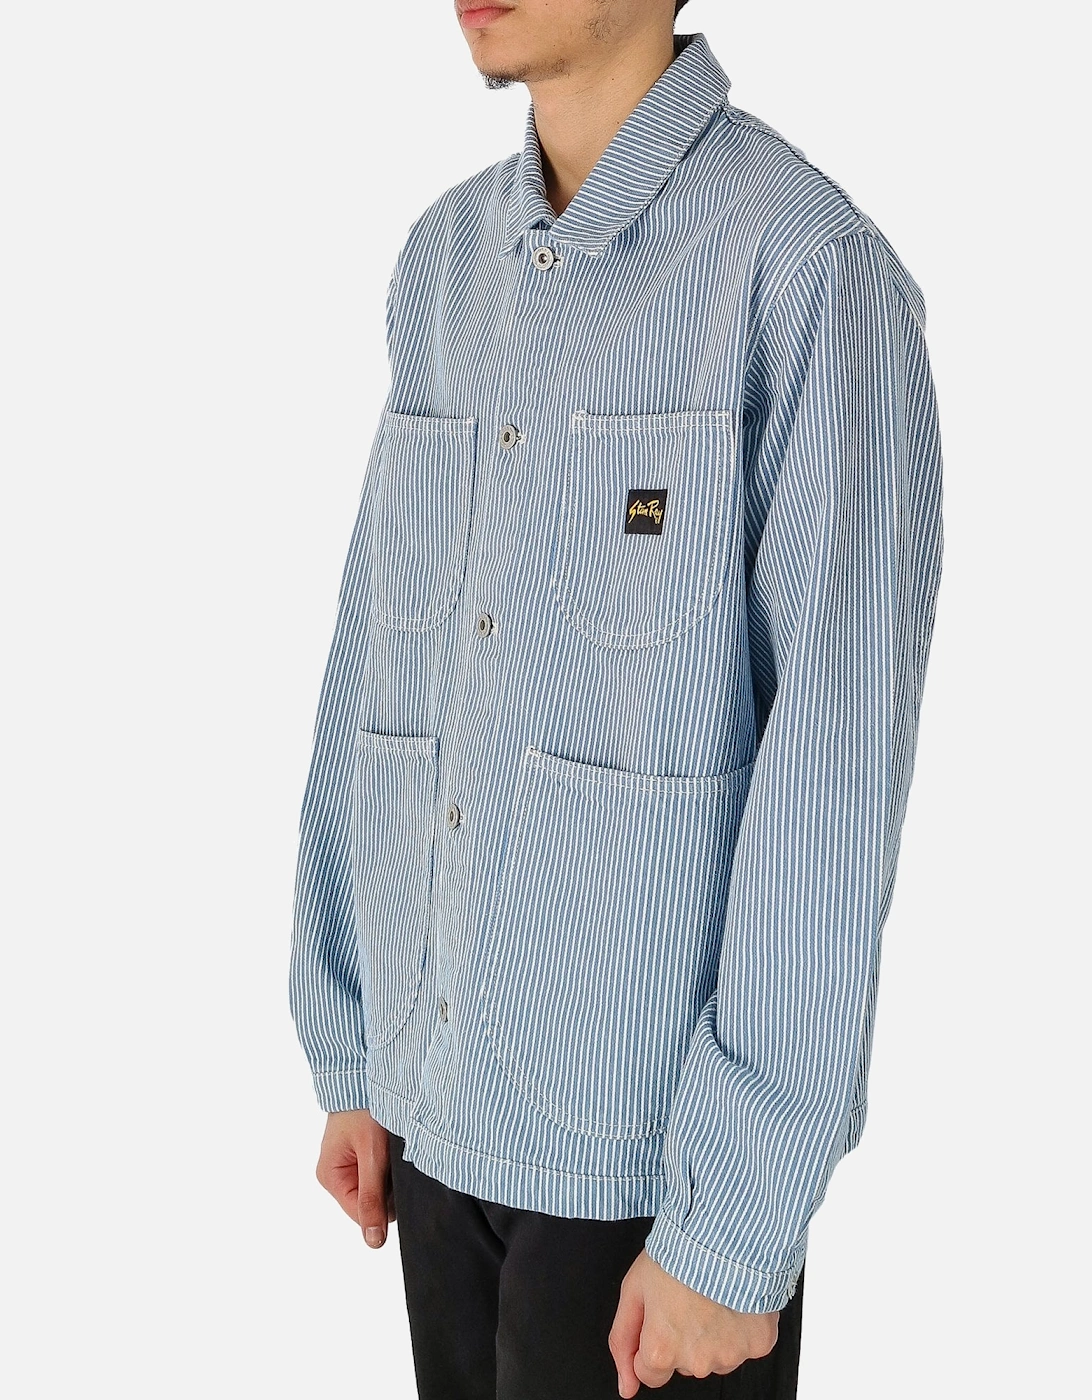 Coverall Ticking Stripe Blue Jacket